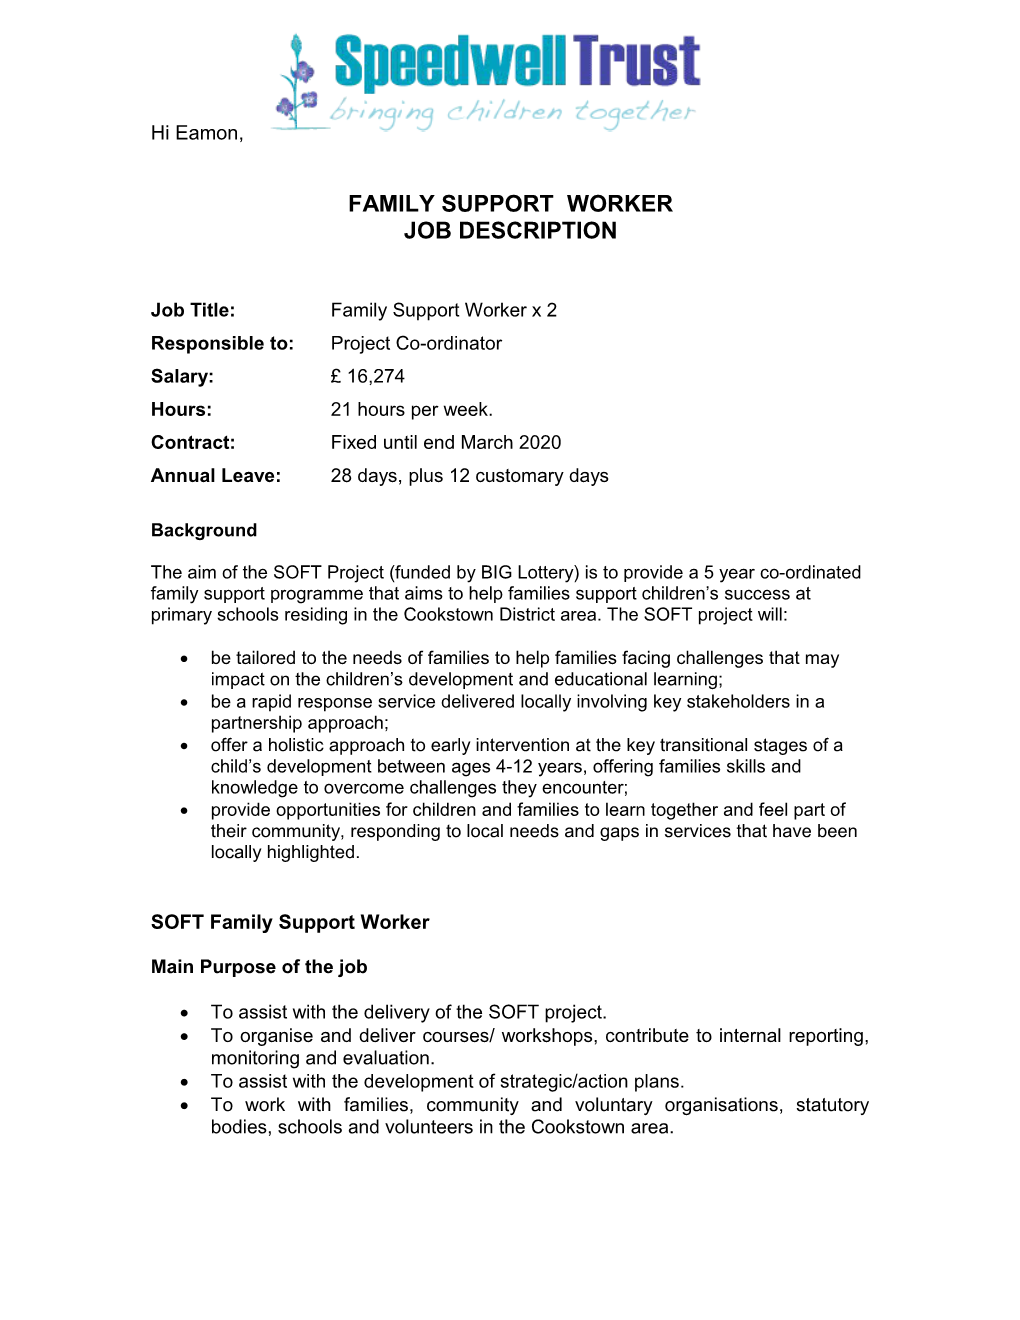 Family Support Worker